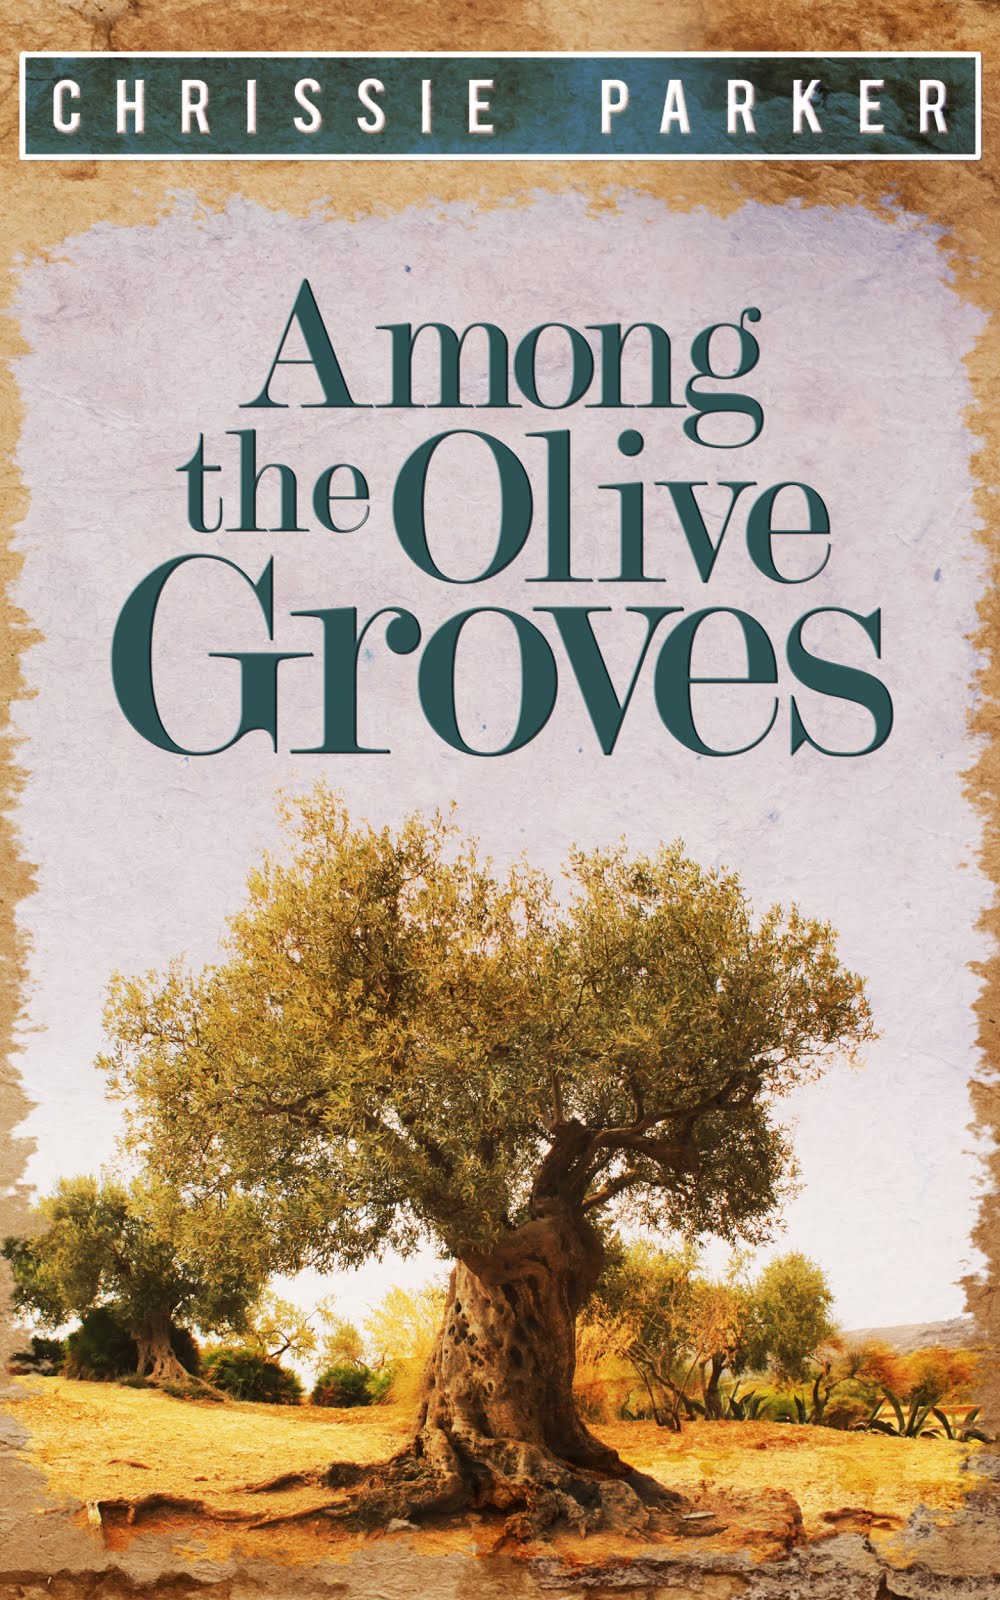 Among the Olive Groves